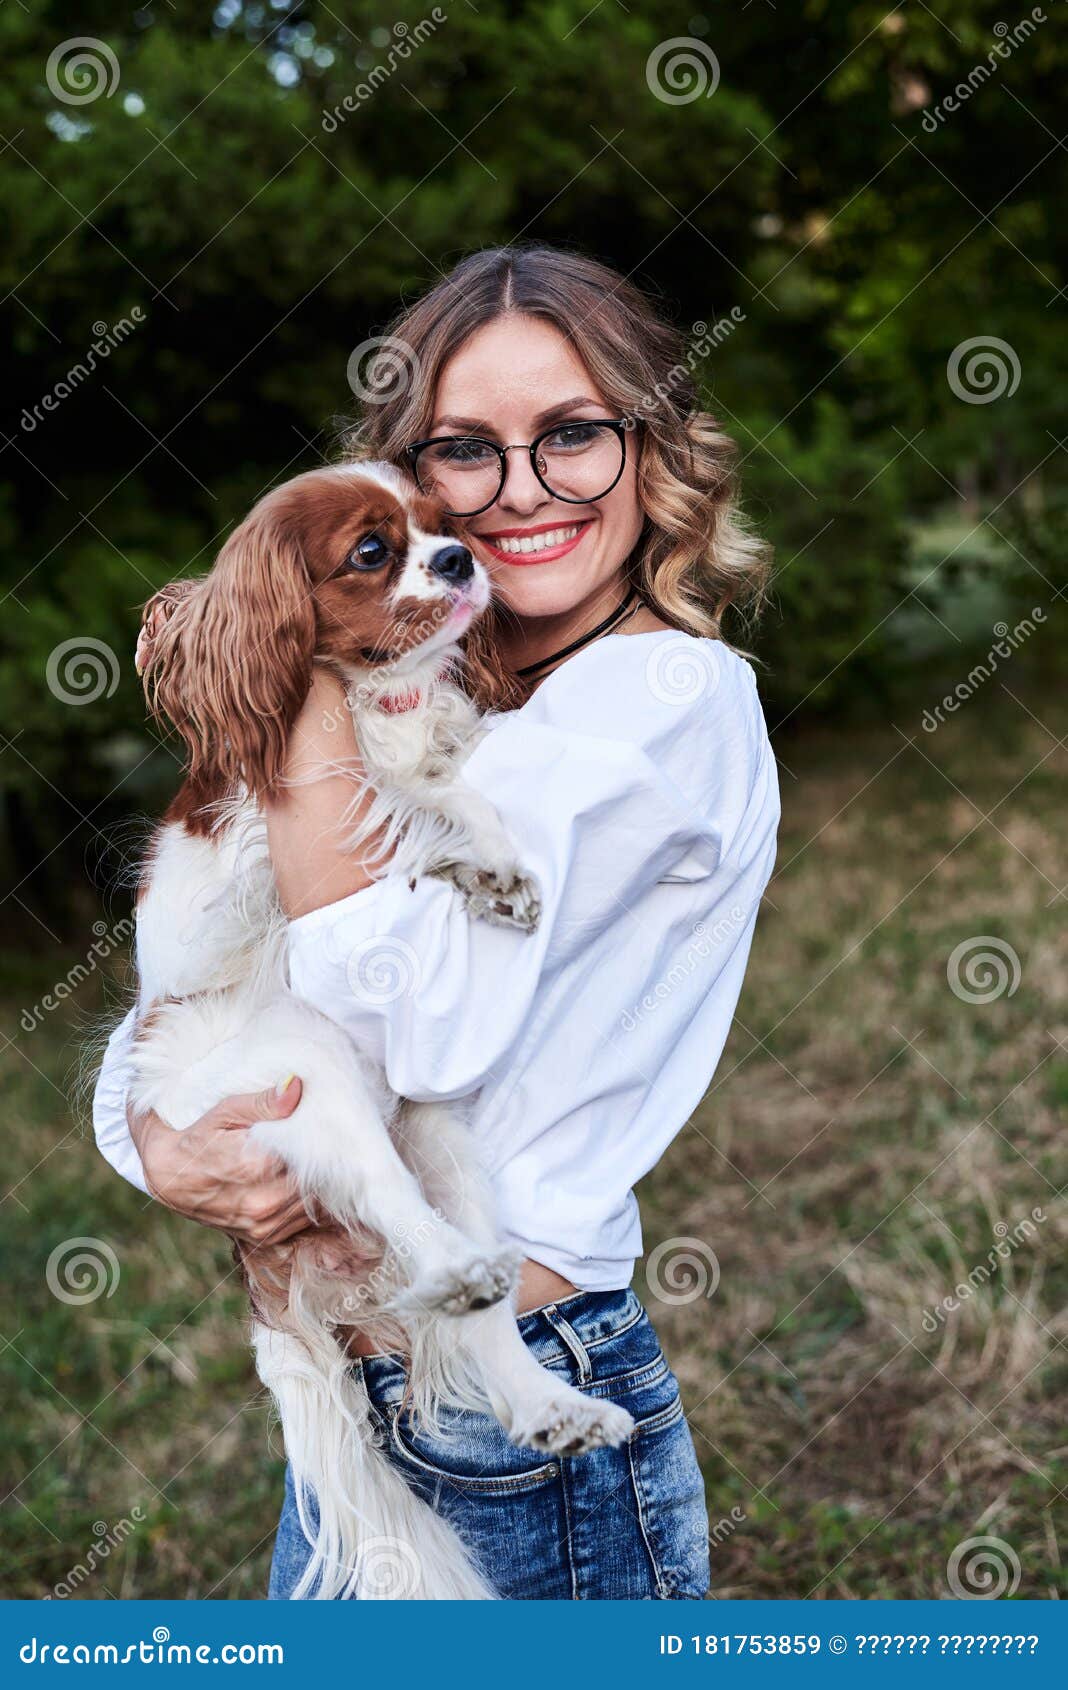 Young Pretty Blond Woman with Curly Hair, Wearing Eyeglasses and White  Shirt, Holding Small White and Brown Dog in Park in Summer Stock Image -  Image of picnic, green: 181753859